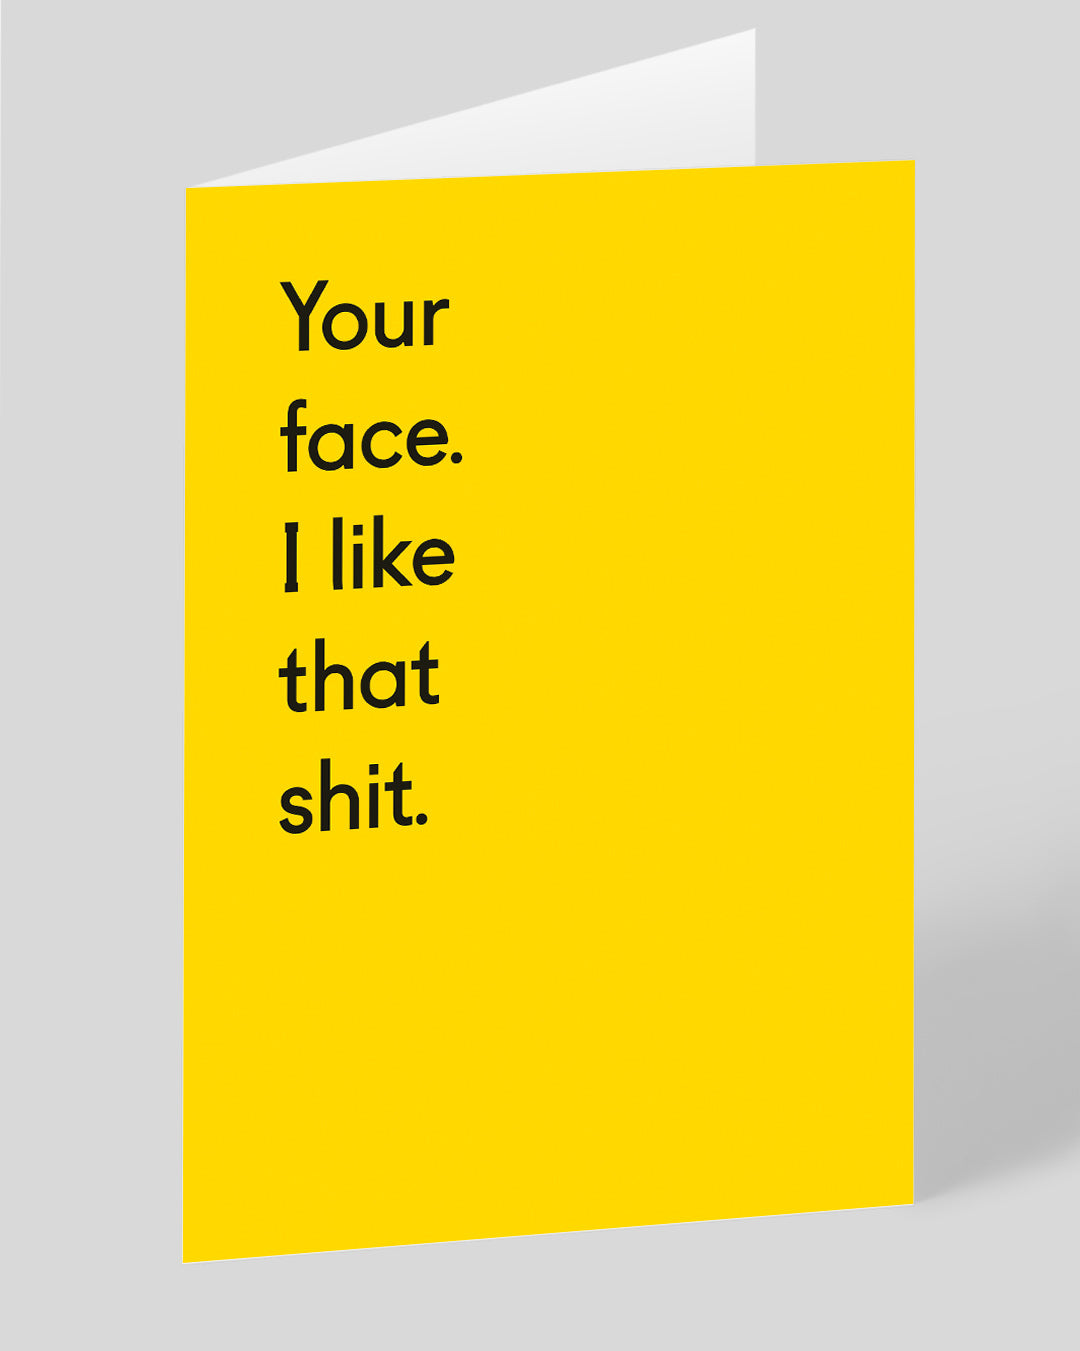 Valentine’s Day | Funny Valentines Card For Him or Her | Personalised Your Face. I Like That Shit. Greeting Card | Ohh Deer Unique Valentine’s Card | Made In The UK, Eco-Friendly Materials, Plastic Free Packaging